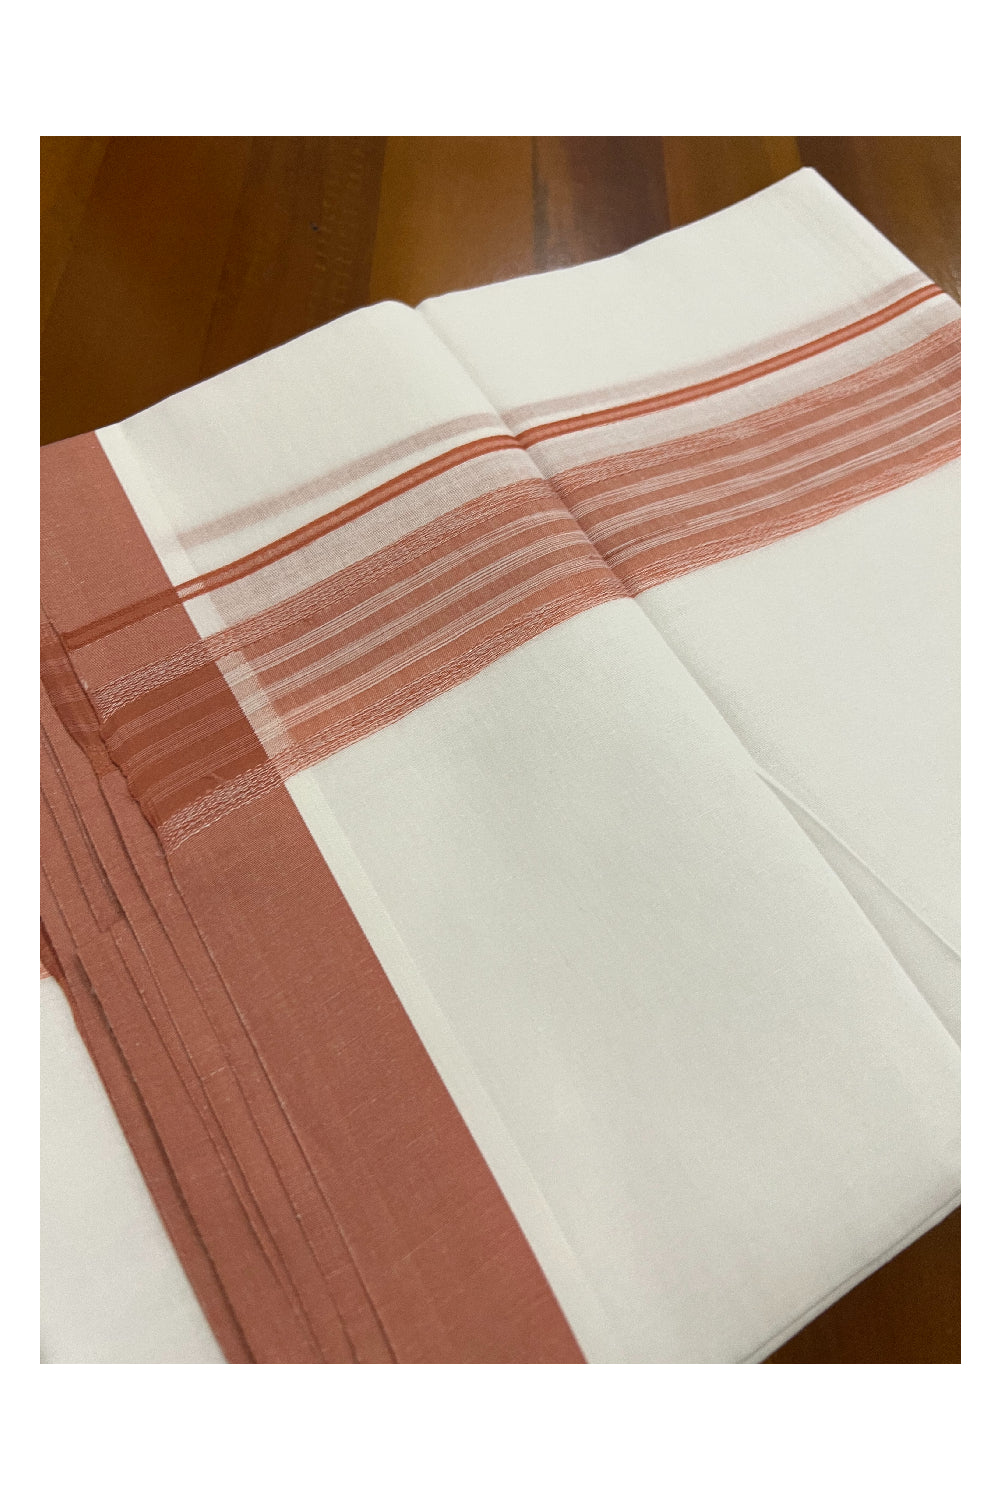 Pure White Kerala Cotton Double Mundu with Brick Red Border (South Indian Dhoti)